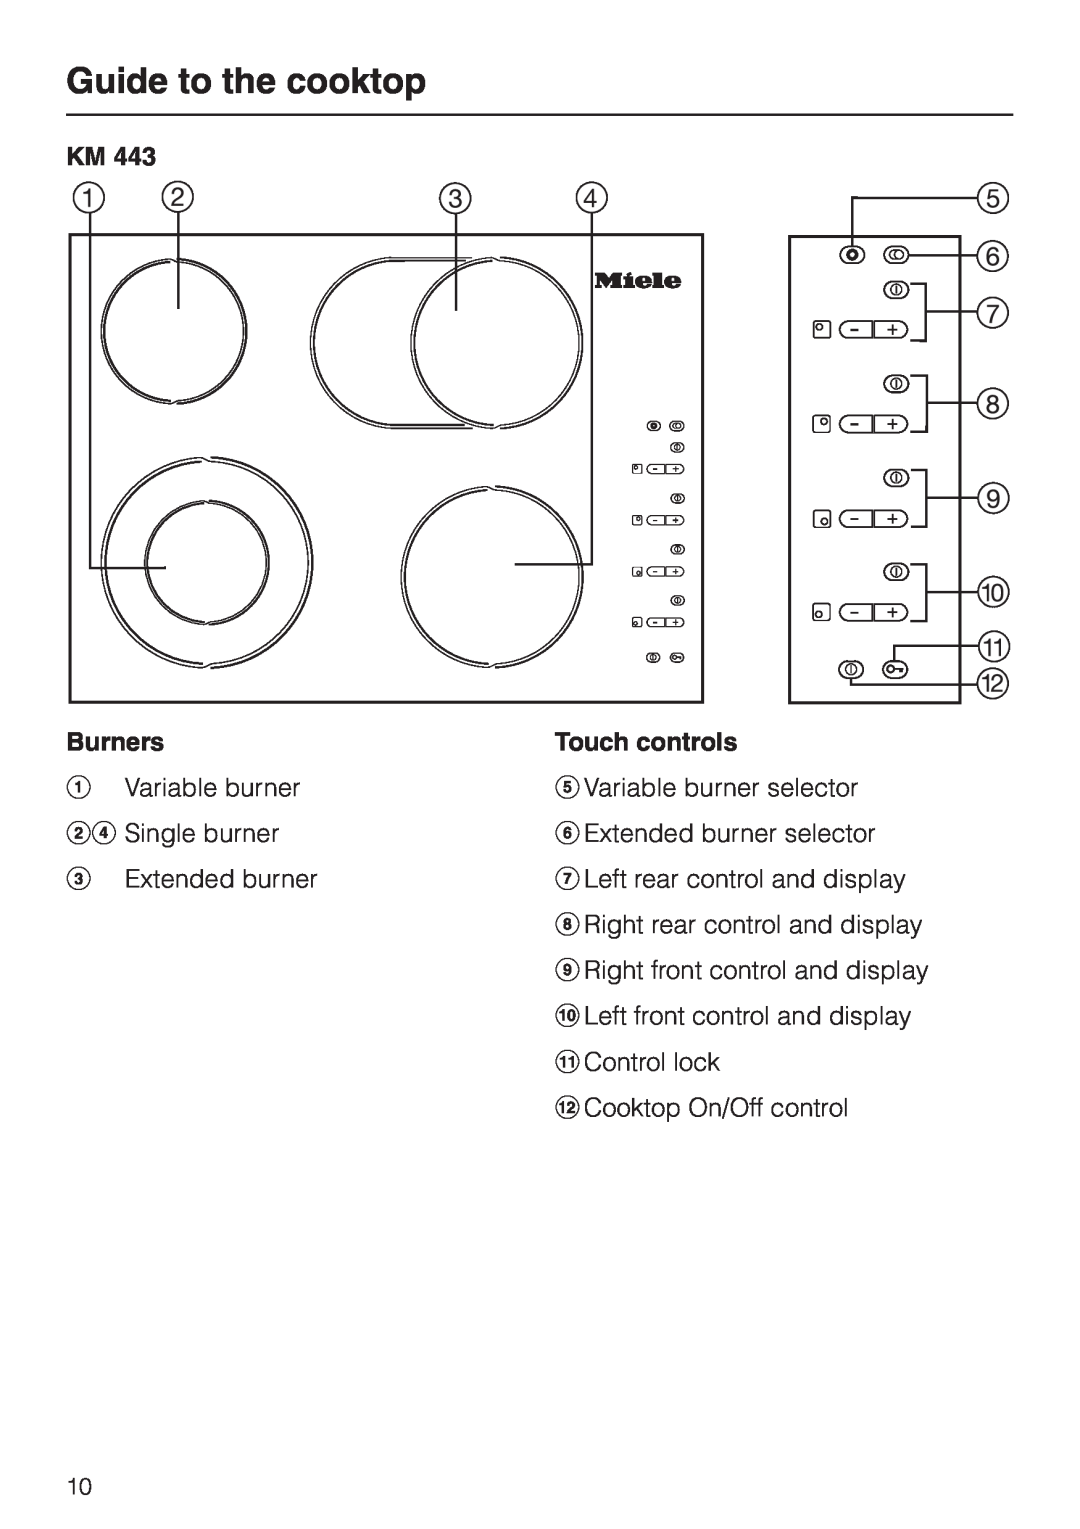 Miele KM 443 operating instructions Guide to the cooktop, Burners, Touch controls 